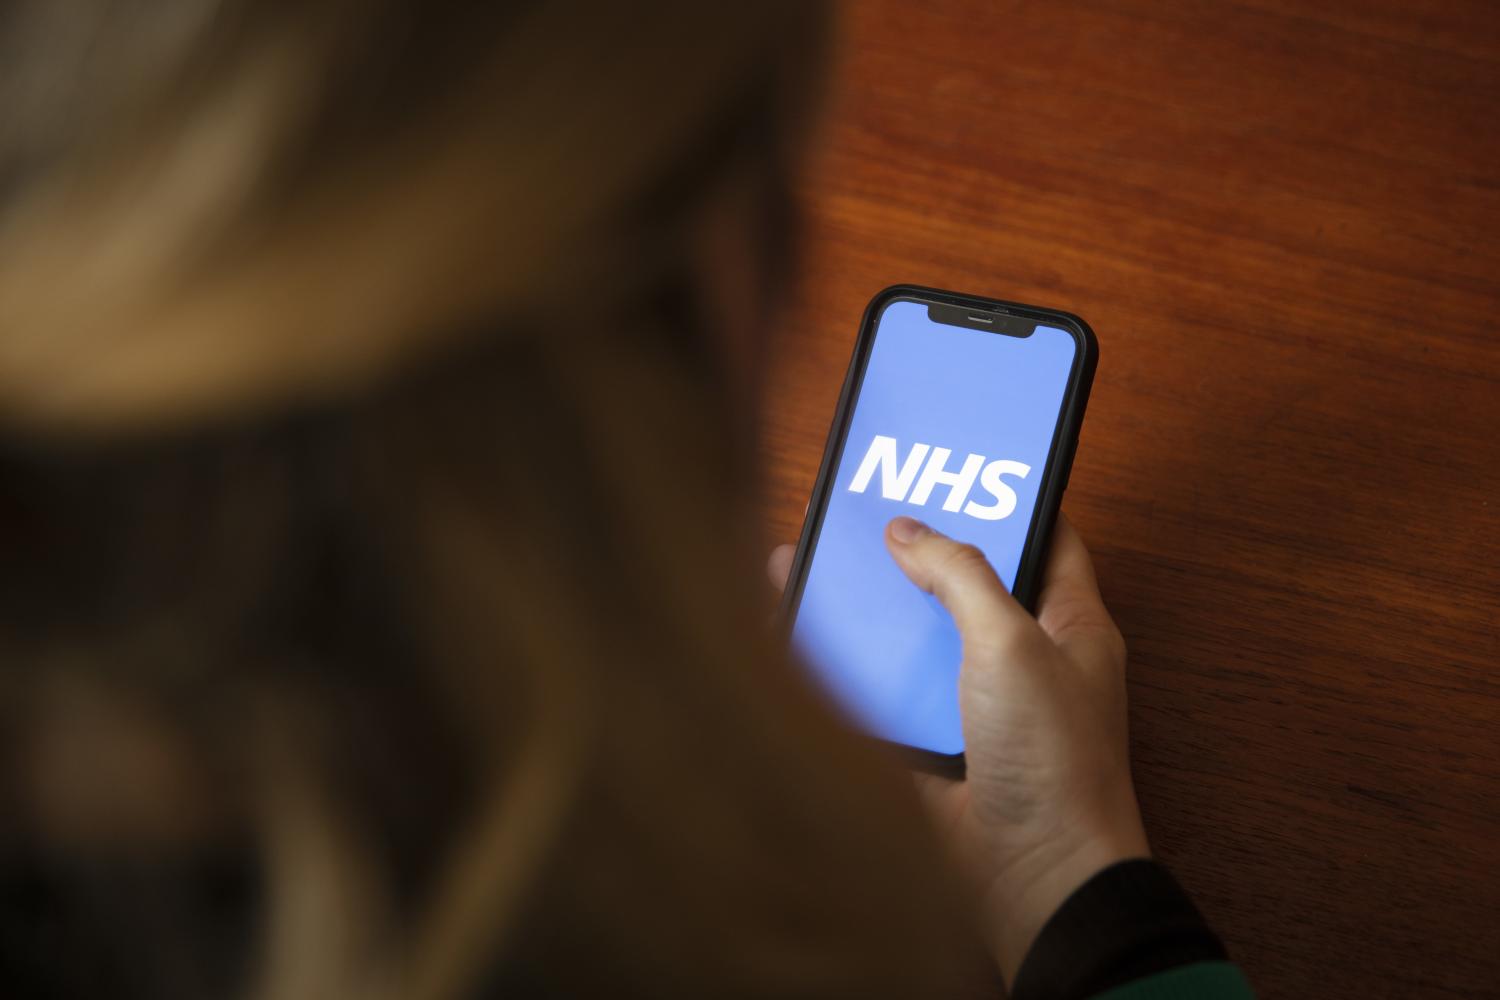 women looking at a mobile displaying the NHS logo